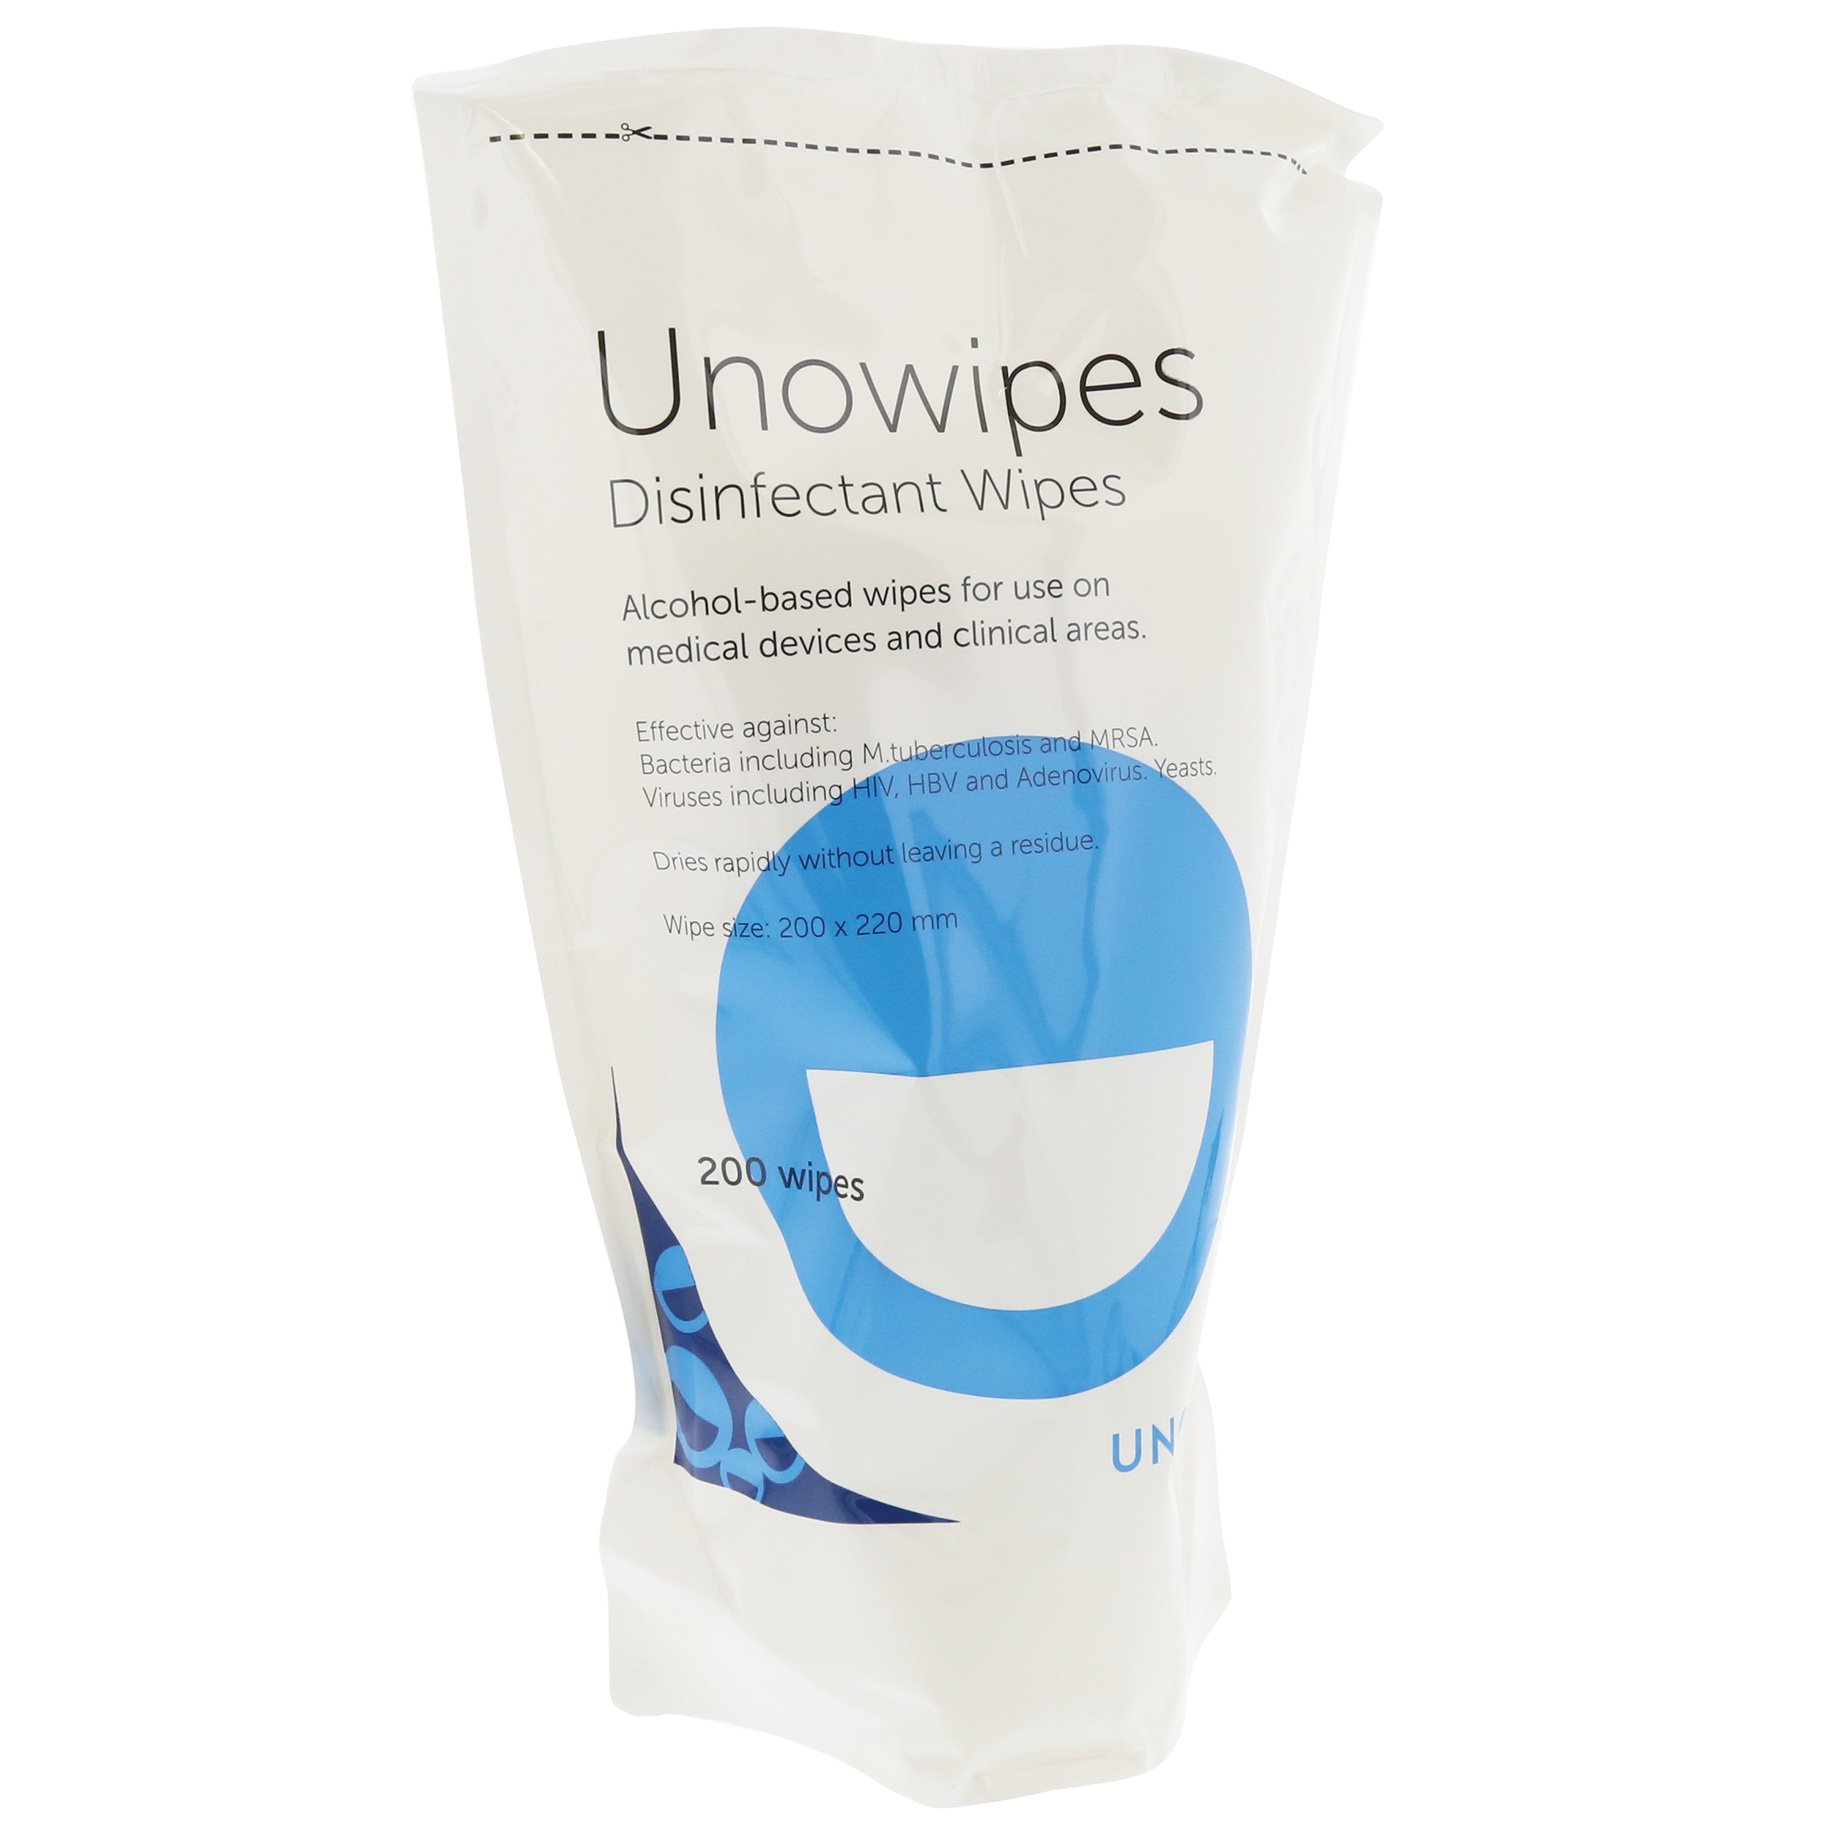 UnoWipes Disinfectant Wipes Refill Pack 